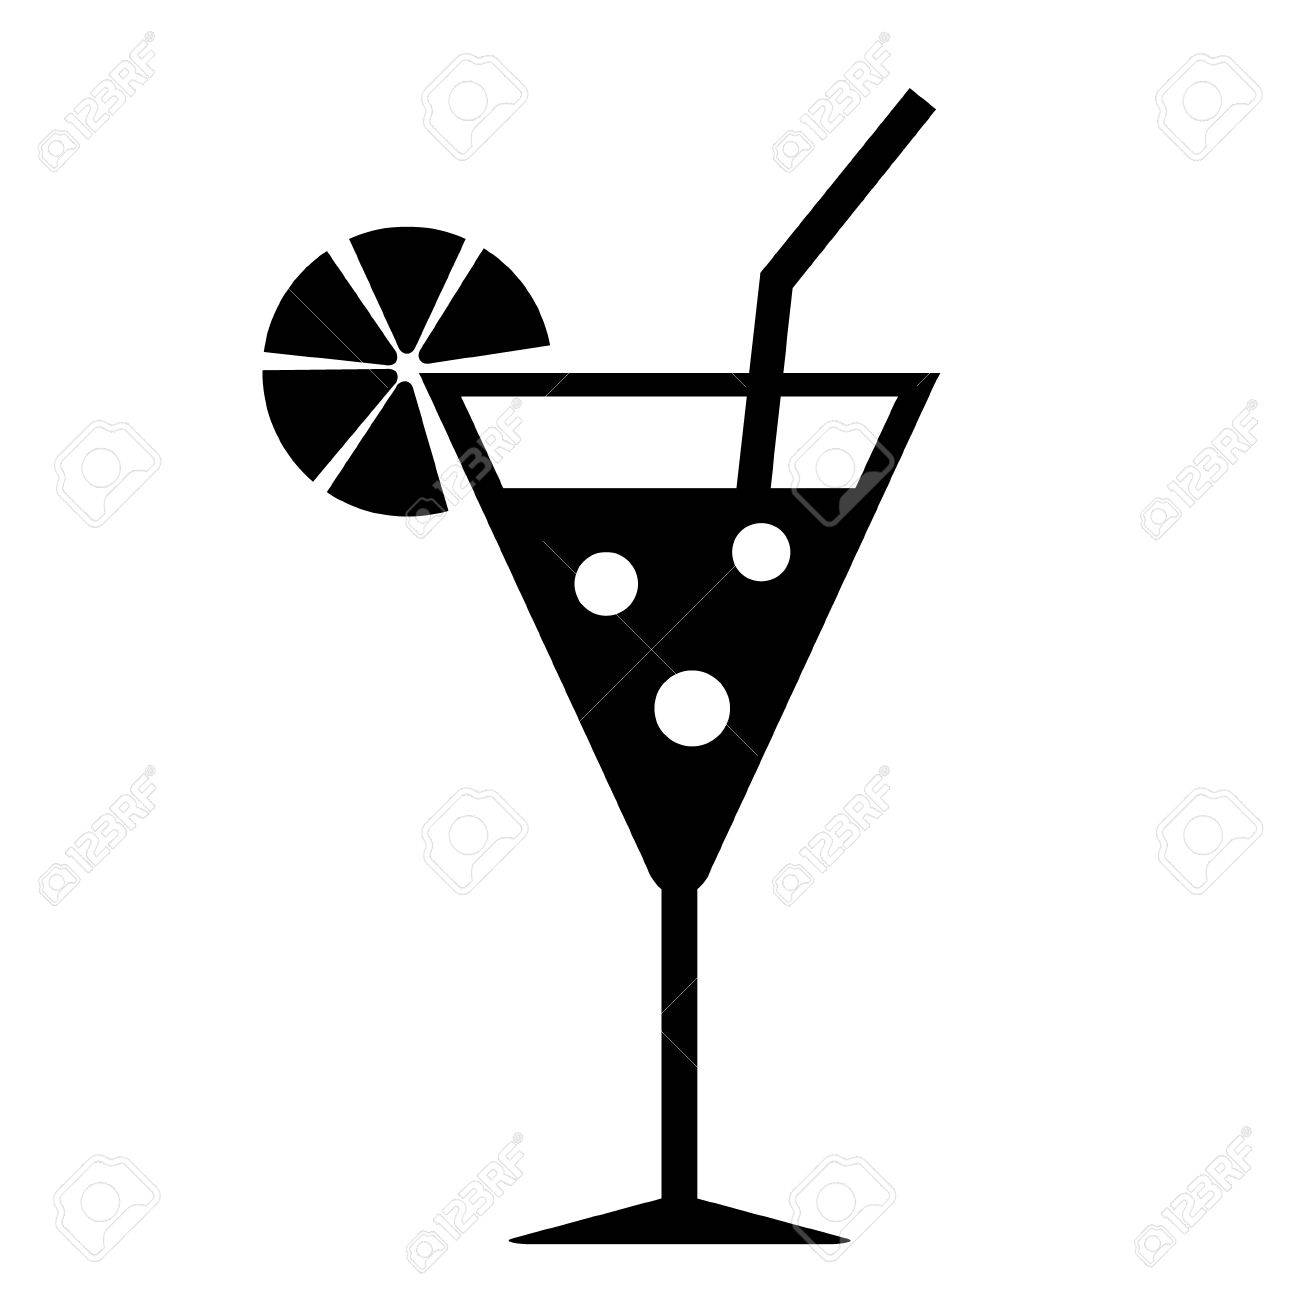 Cocktail glass icon on white background.